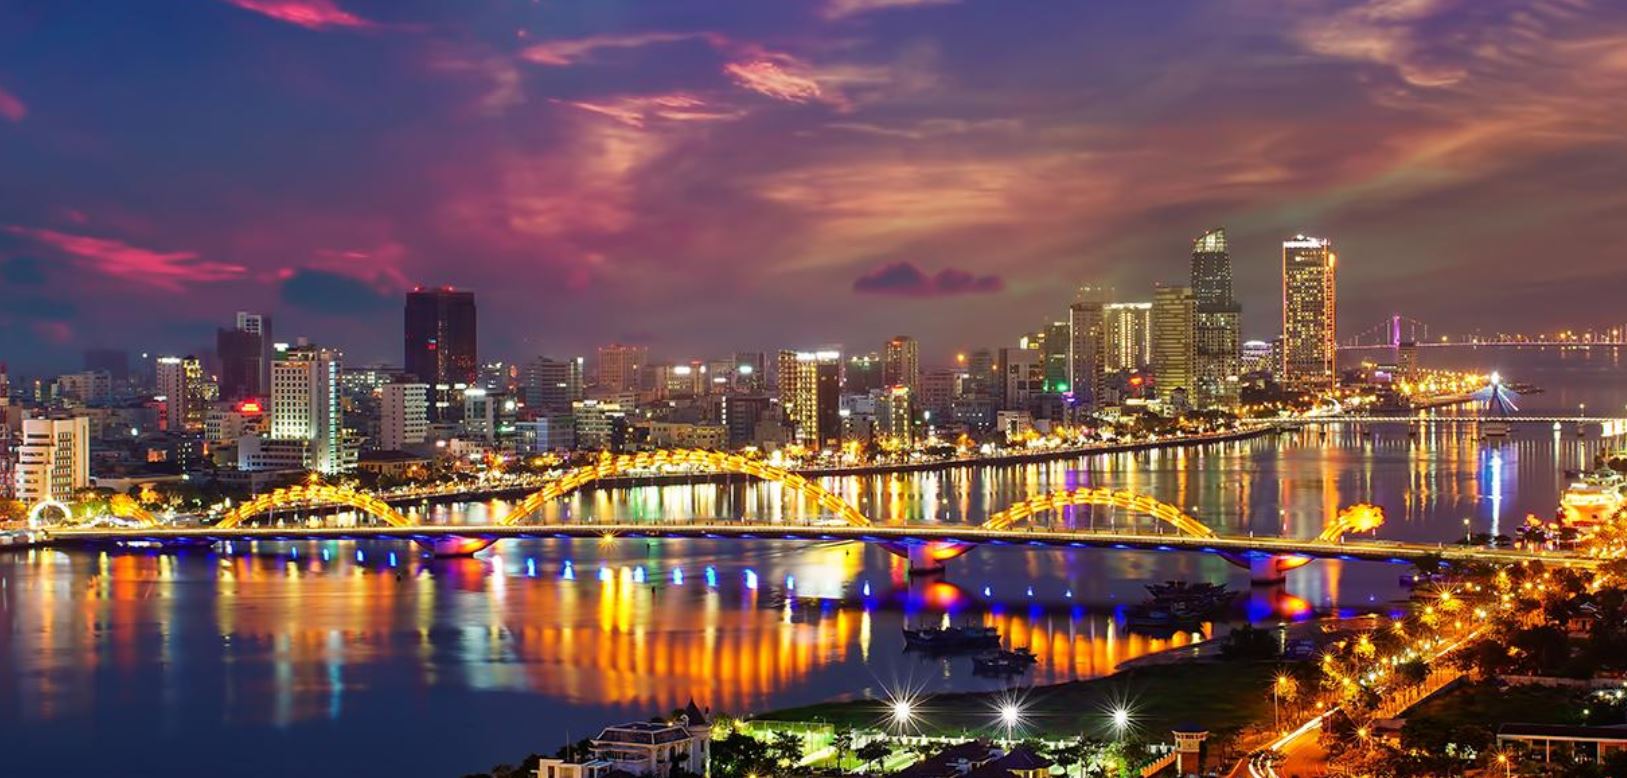 Essential Tips for First-Time Travelers to Da Nang